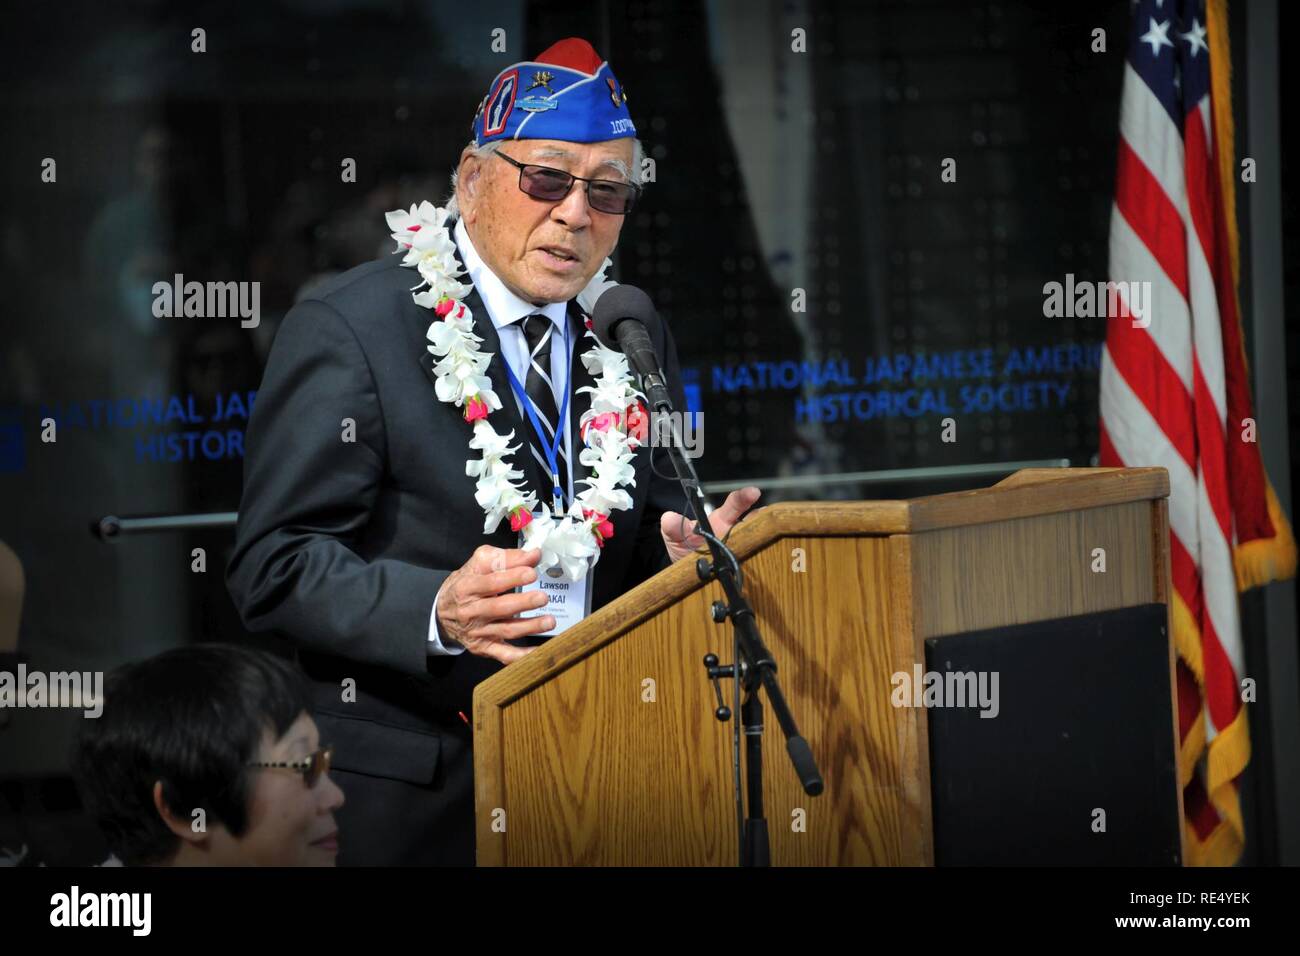 Photo 6 - Lawson Sakai, a Veteran of the 442nd Regimental Combat Team, speaks during the National Japanese American Historical Society’s ceremony to honor Nisei Veterans at the Presidio of San Francisco Nov. 12, marking the 75th anniversary of the founding of the Military Intelligence Service in an abandoned airplane hangar on Crissy Field at the Presidio of San Francisco. Today, that hangar is the home of the Military Intelligence Service Historic Learning Center, which pays tribute to Nisei Soldiers of World War II. Stock Photo